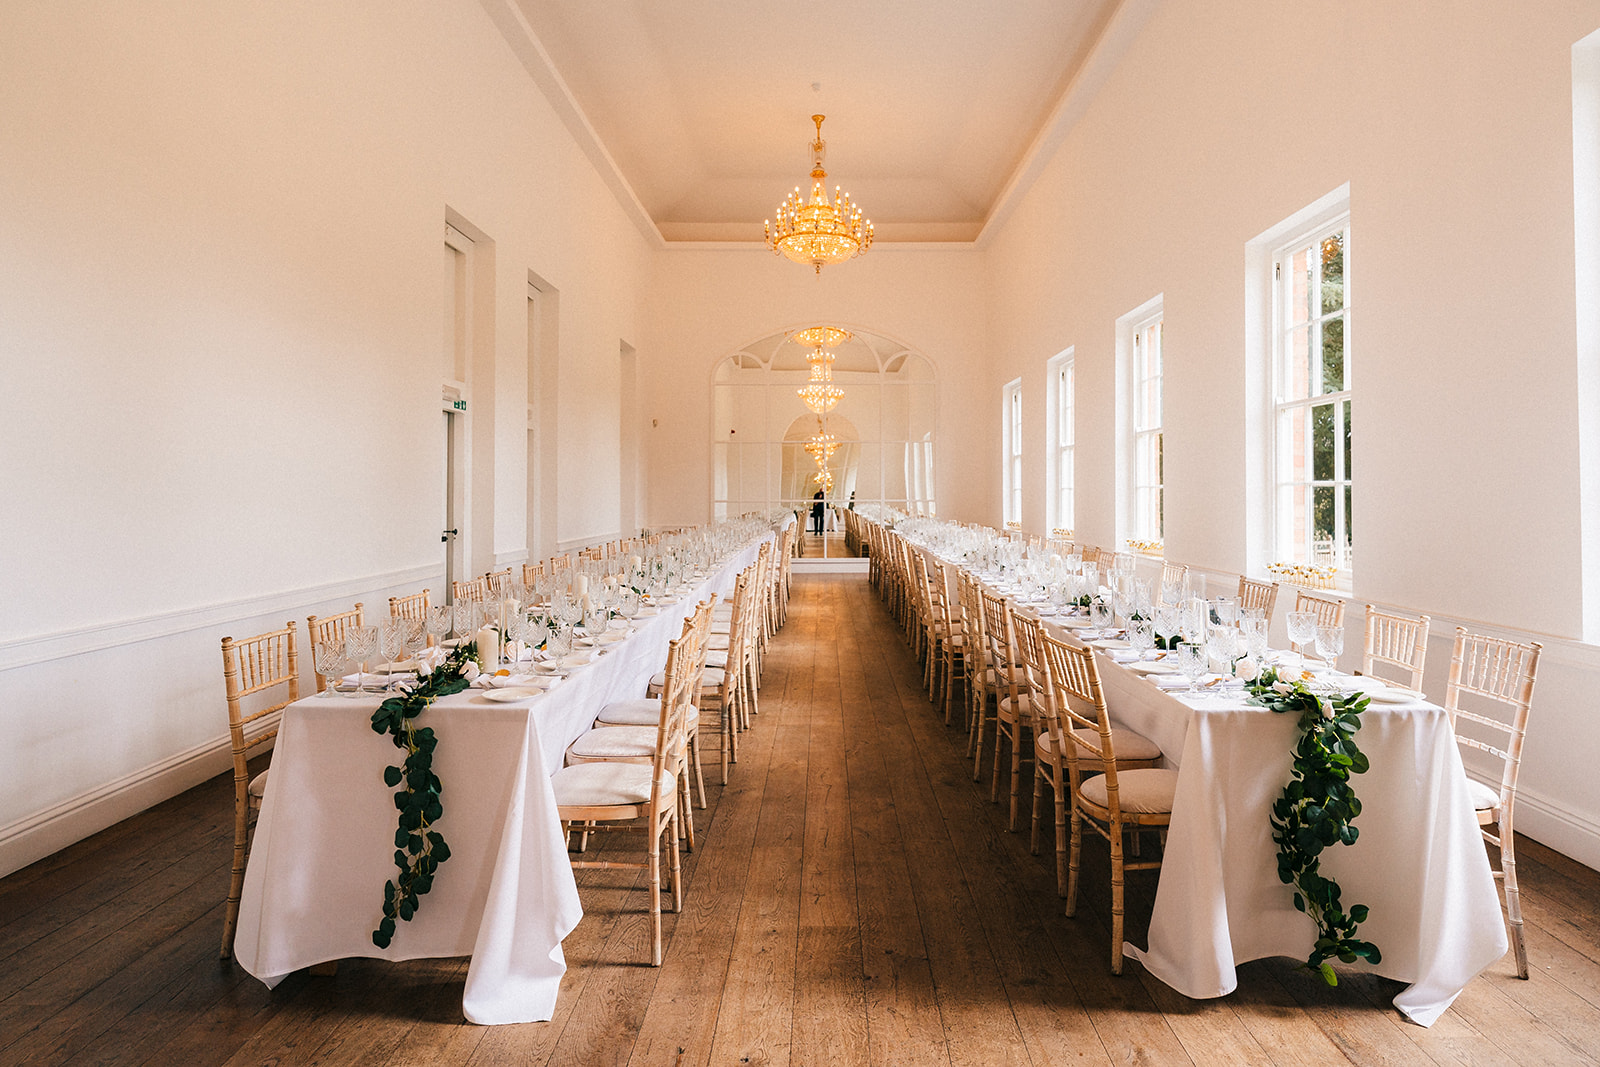 Gallery room at Norwood Park wedding venue in southwell